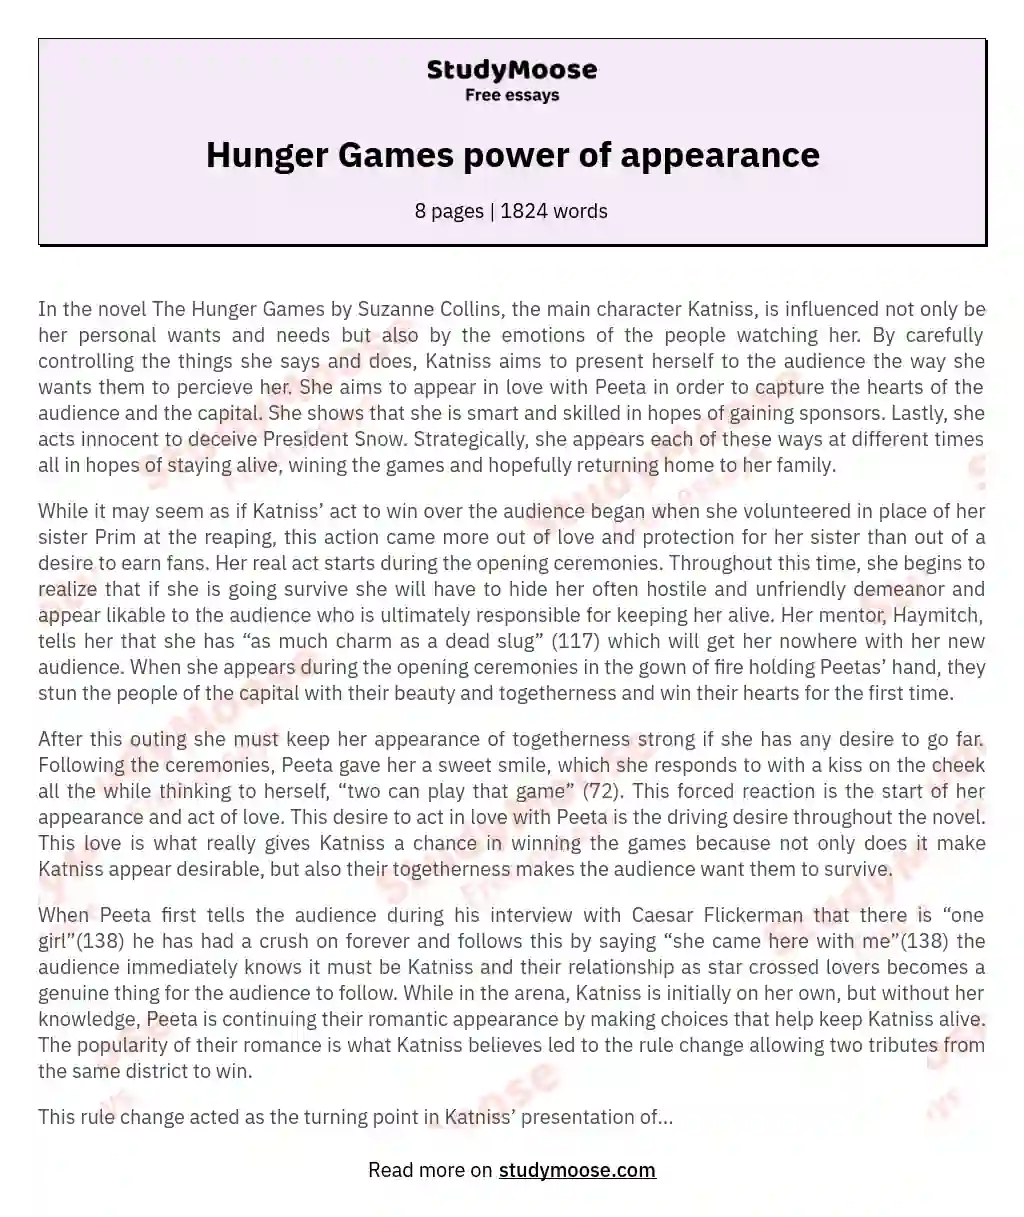 Hunger Games power of appearance